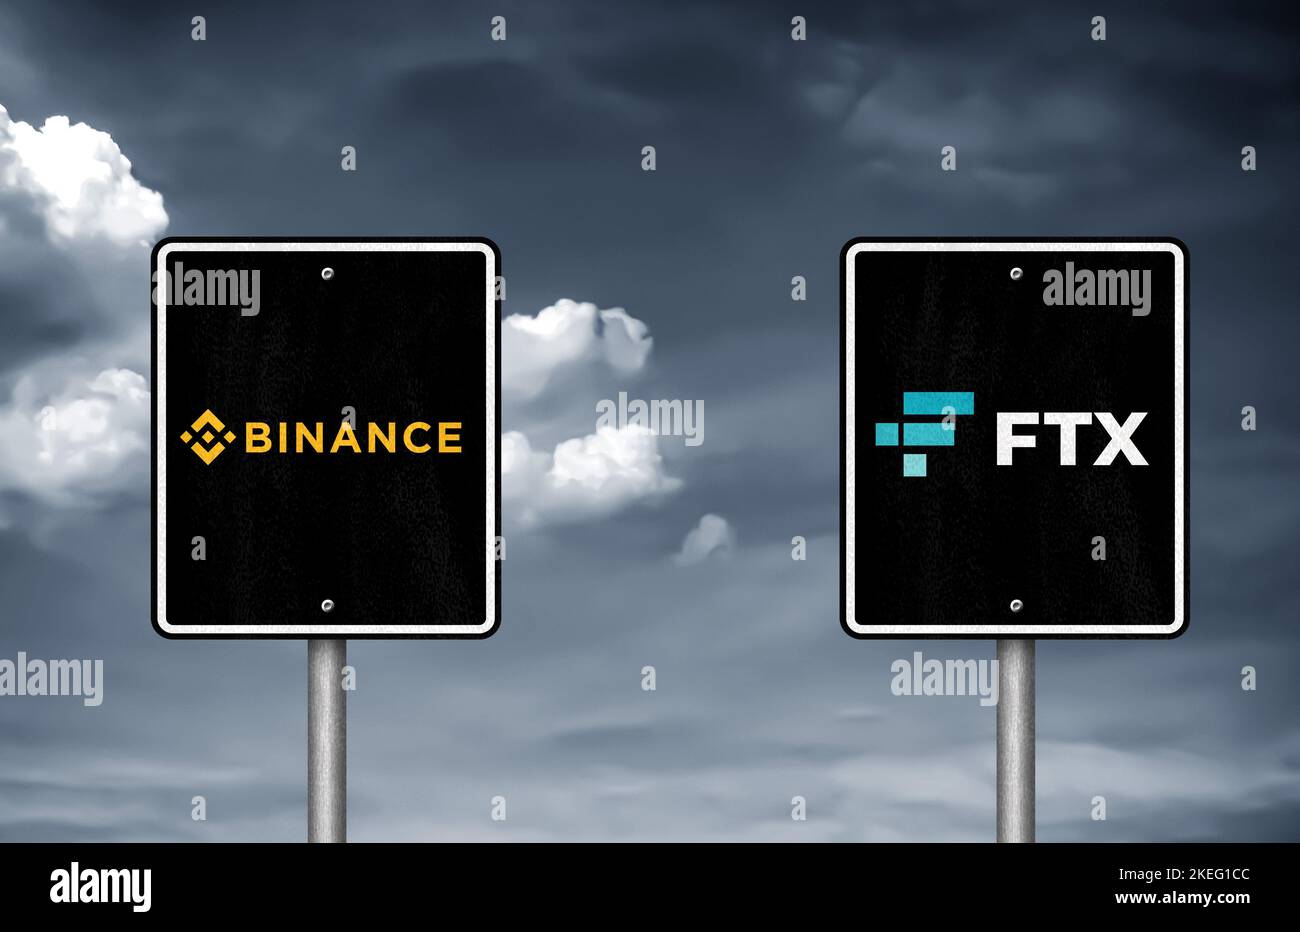 Binance and FTX cryptocurrency exchanges Stock Photo